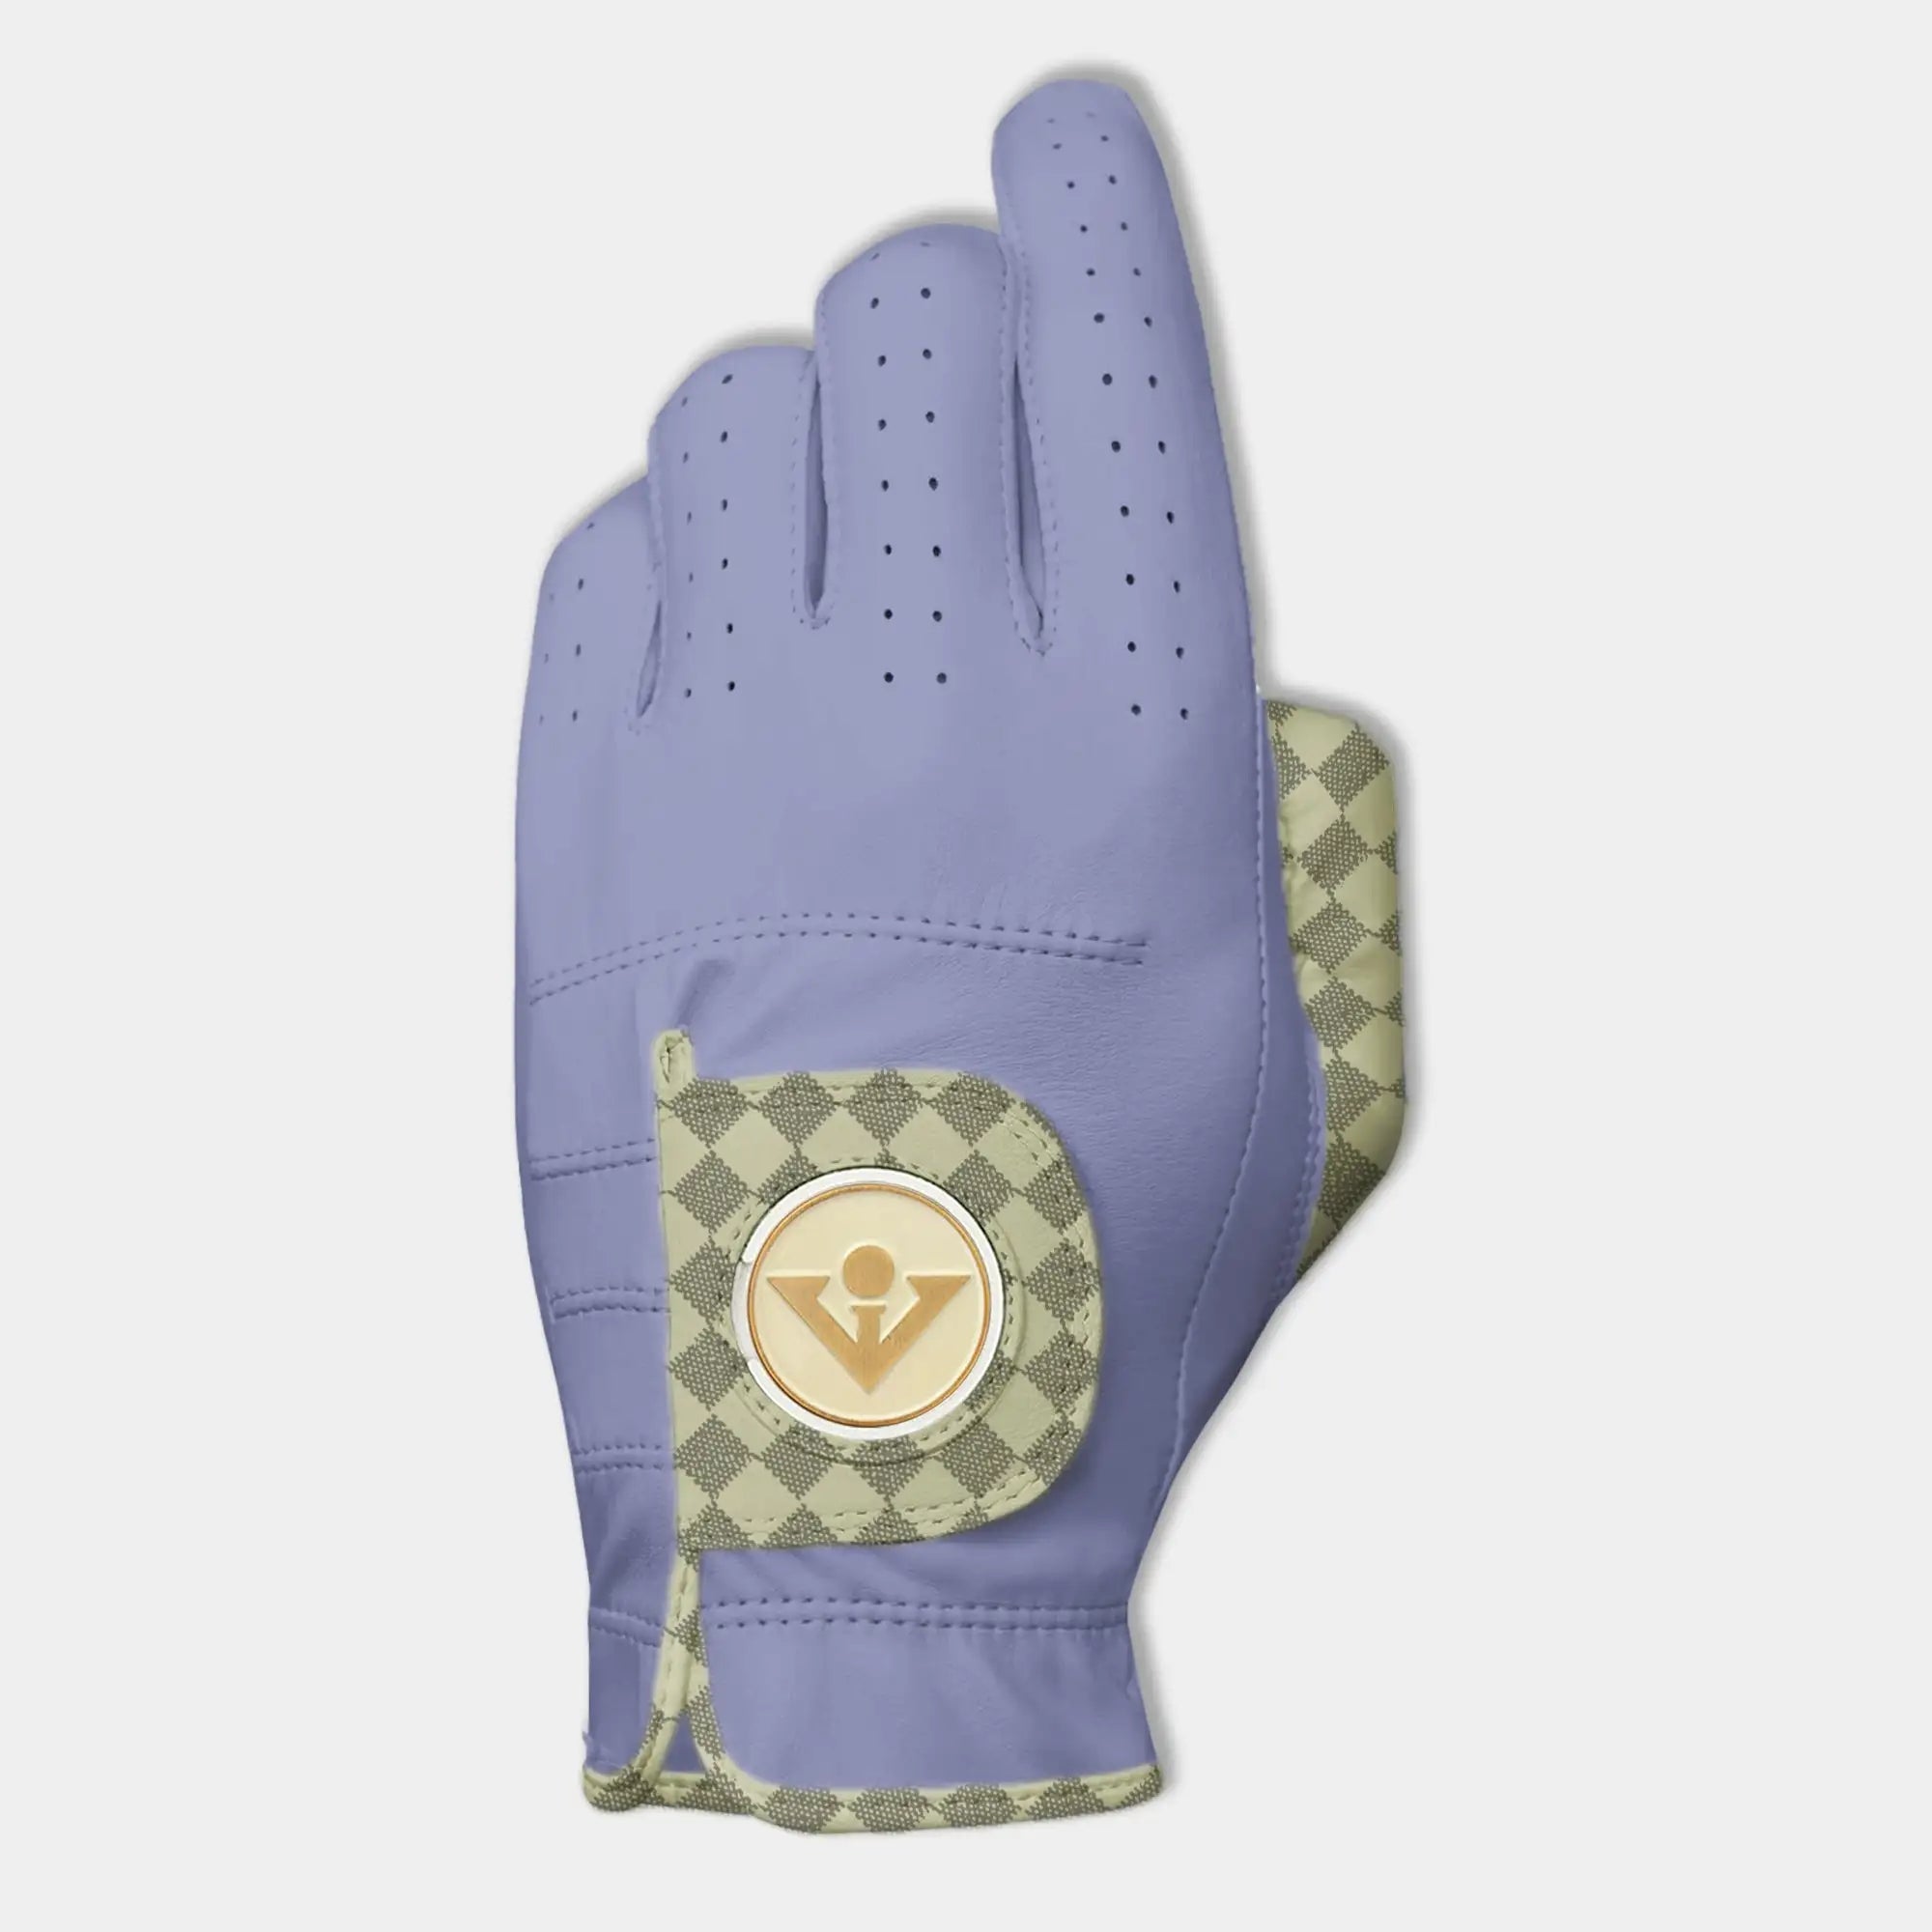 Women's Purple golf glove with lavendar and tan checks. Designer purple golf glove for women.